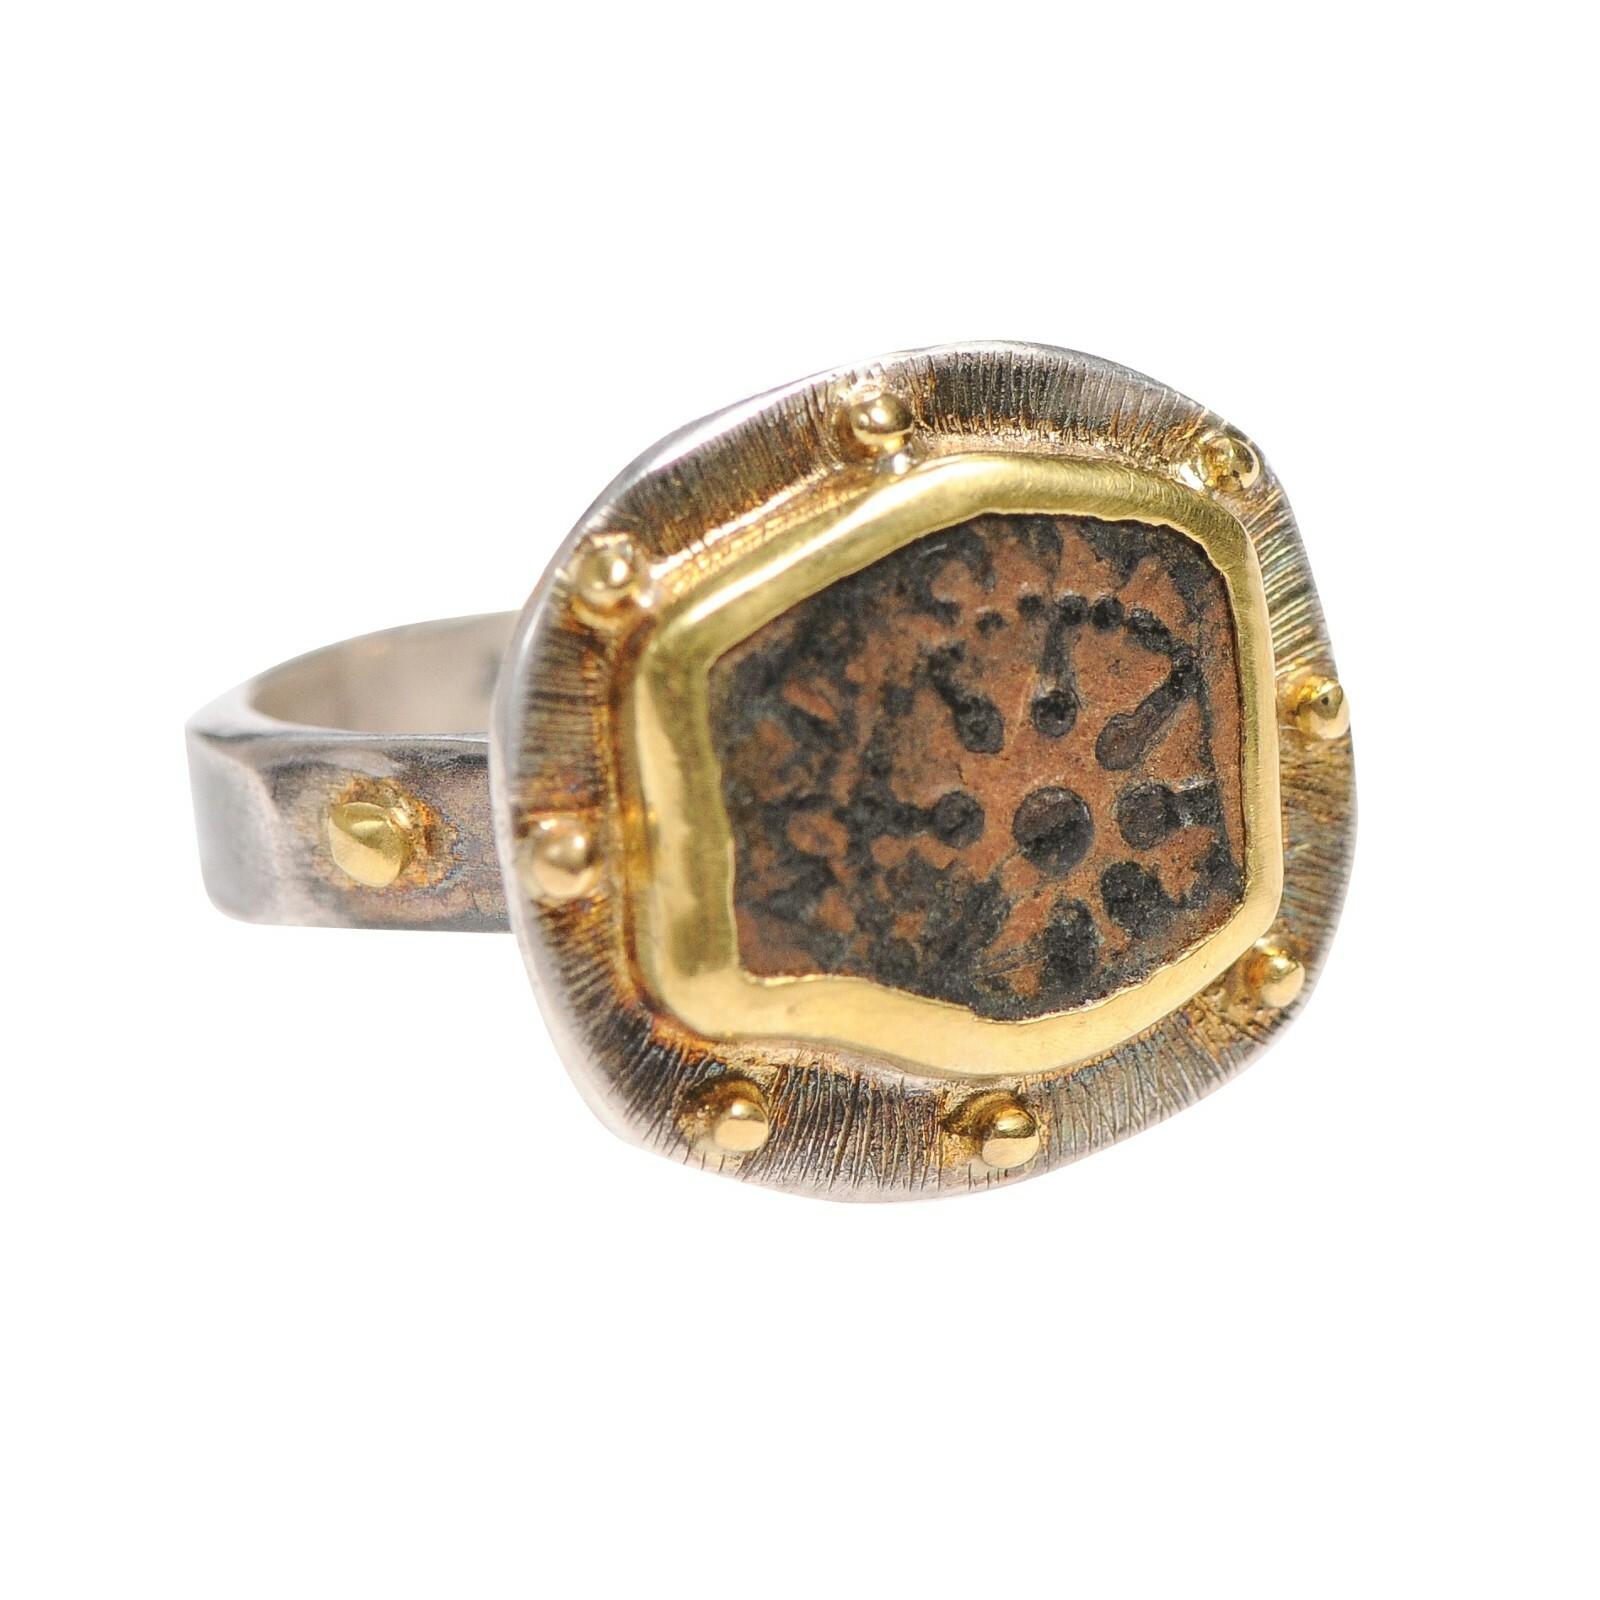 For Sale:  Widow's Mite Ring, 22kt Gold & Sterling